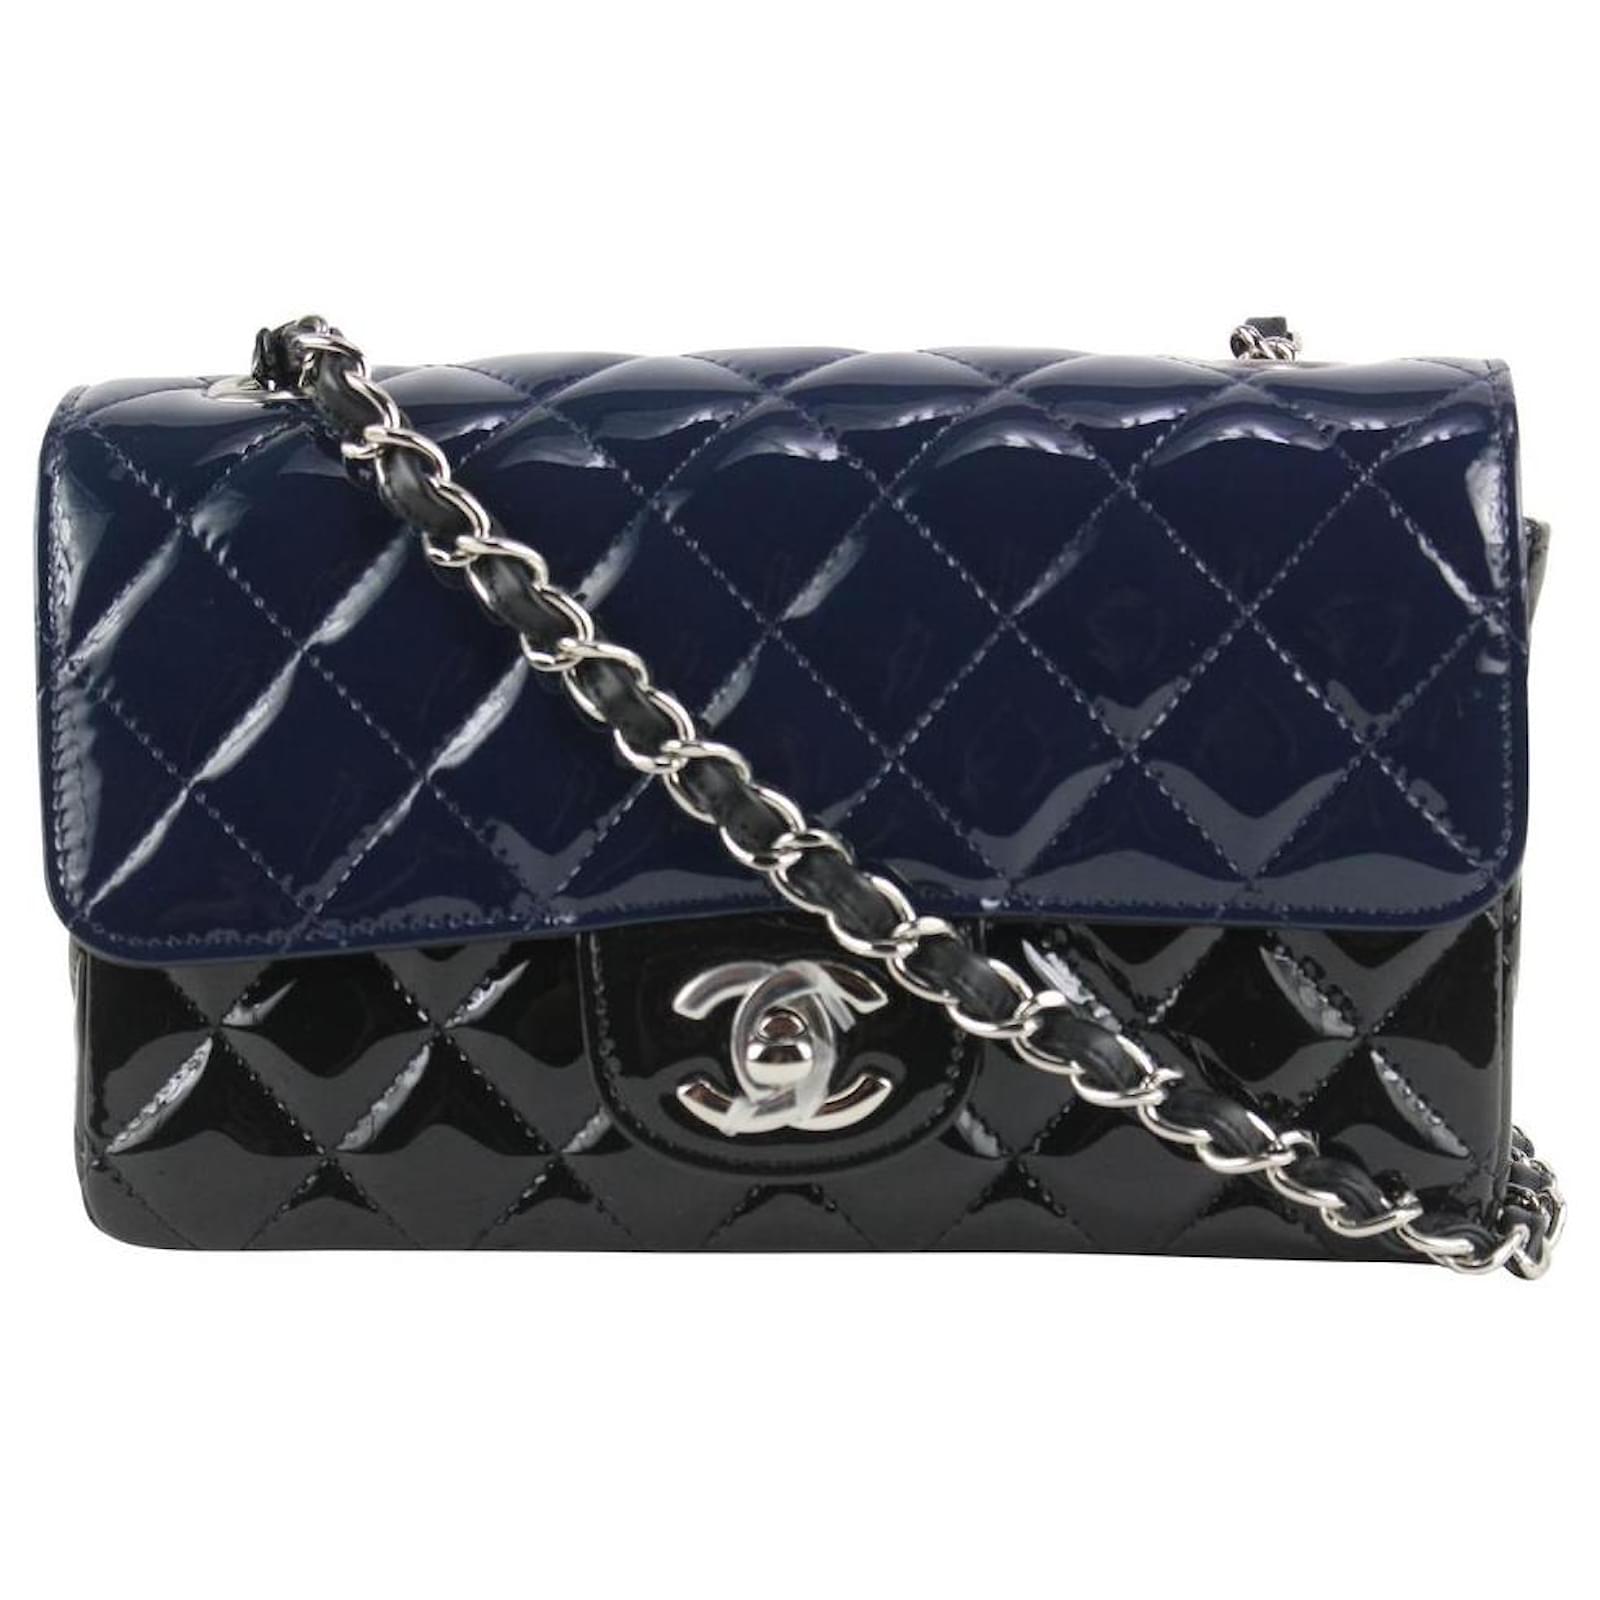 Chanel Bicolor Black x Navy Quilted Patent Mini Classic Flap